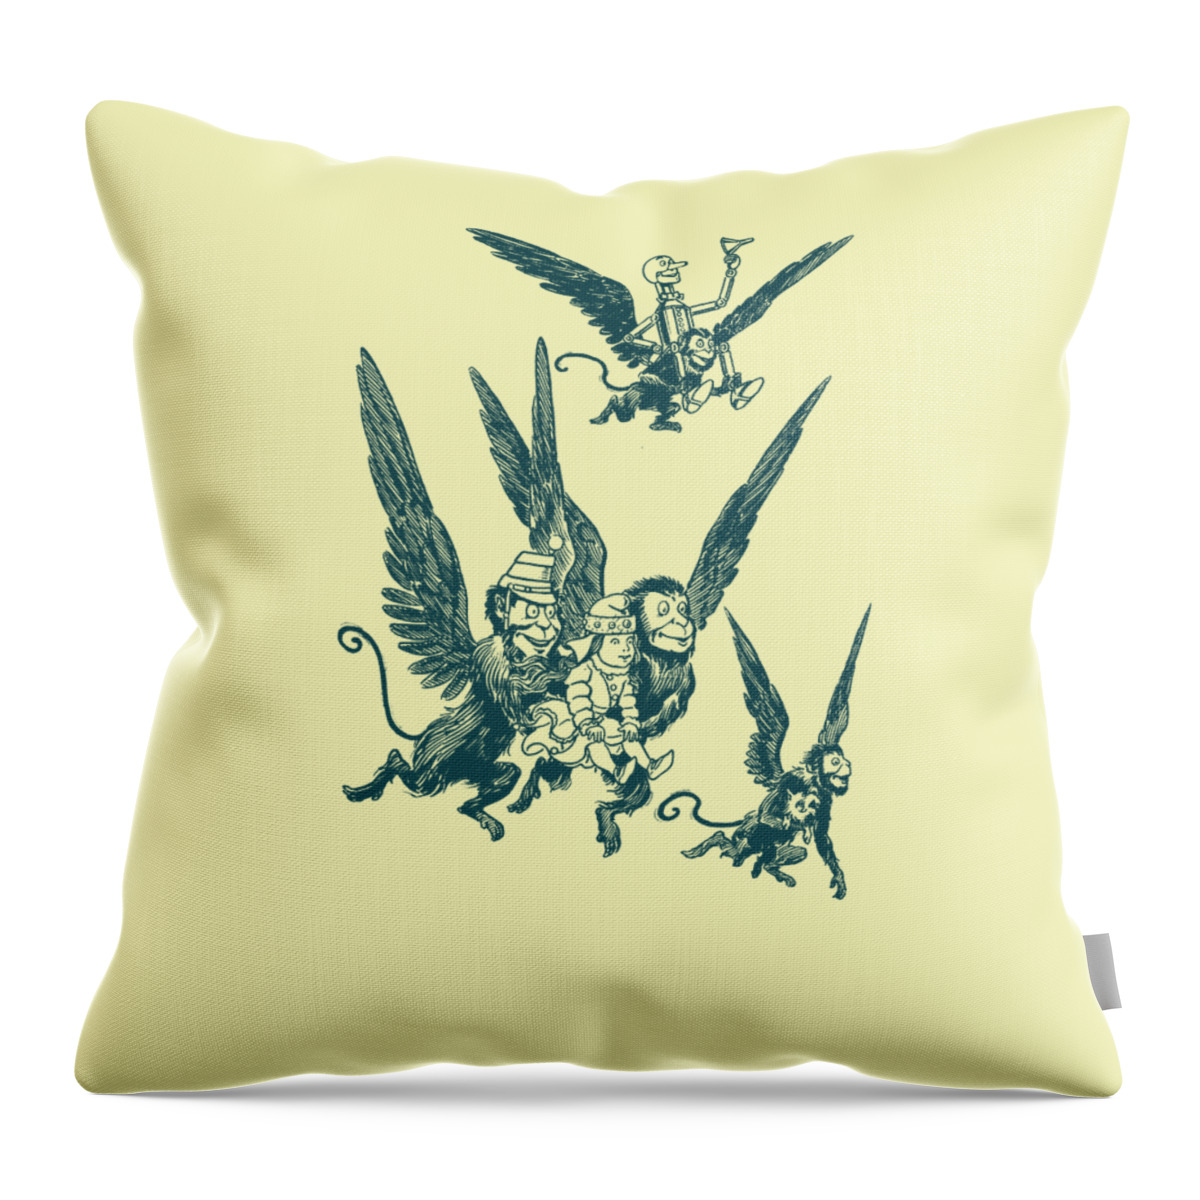 Wizard Of Oz Throw Pillow featuring the digital art The Flying Monkeys From The Wizard Of Oz In Blue by Madame Memento